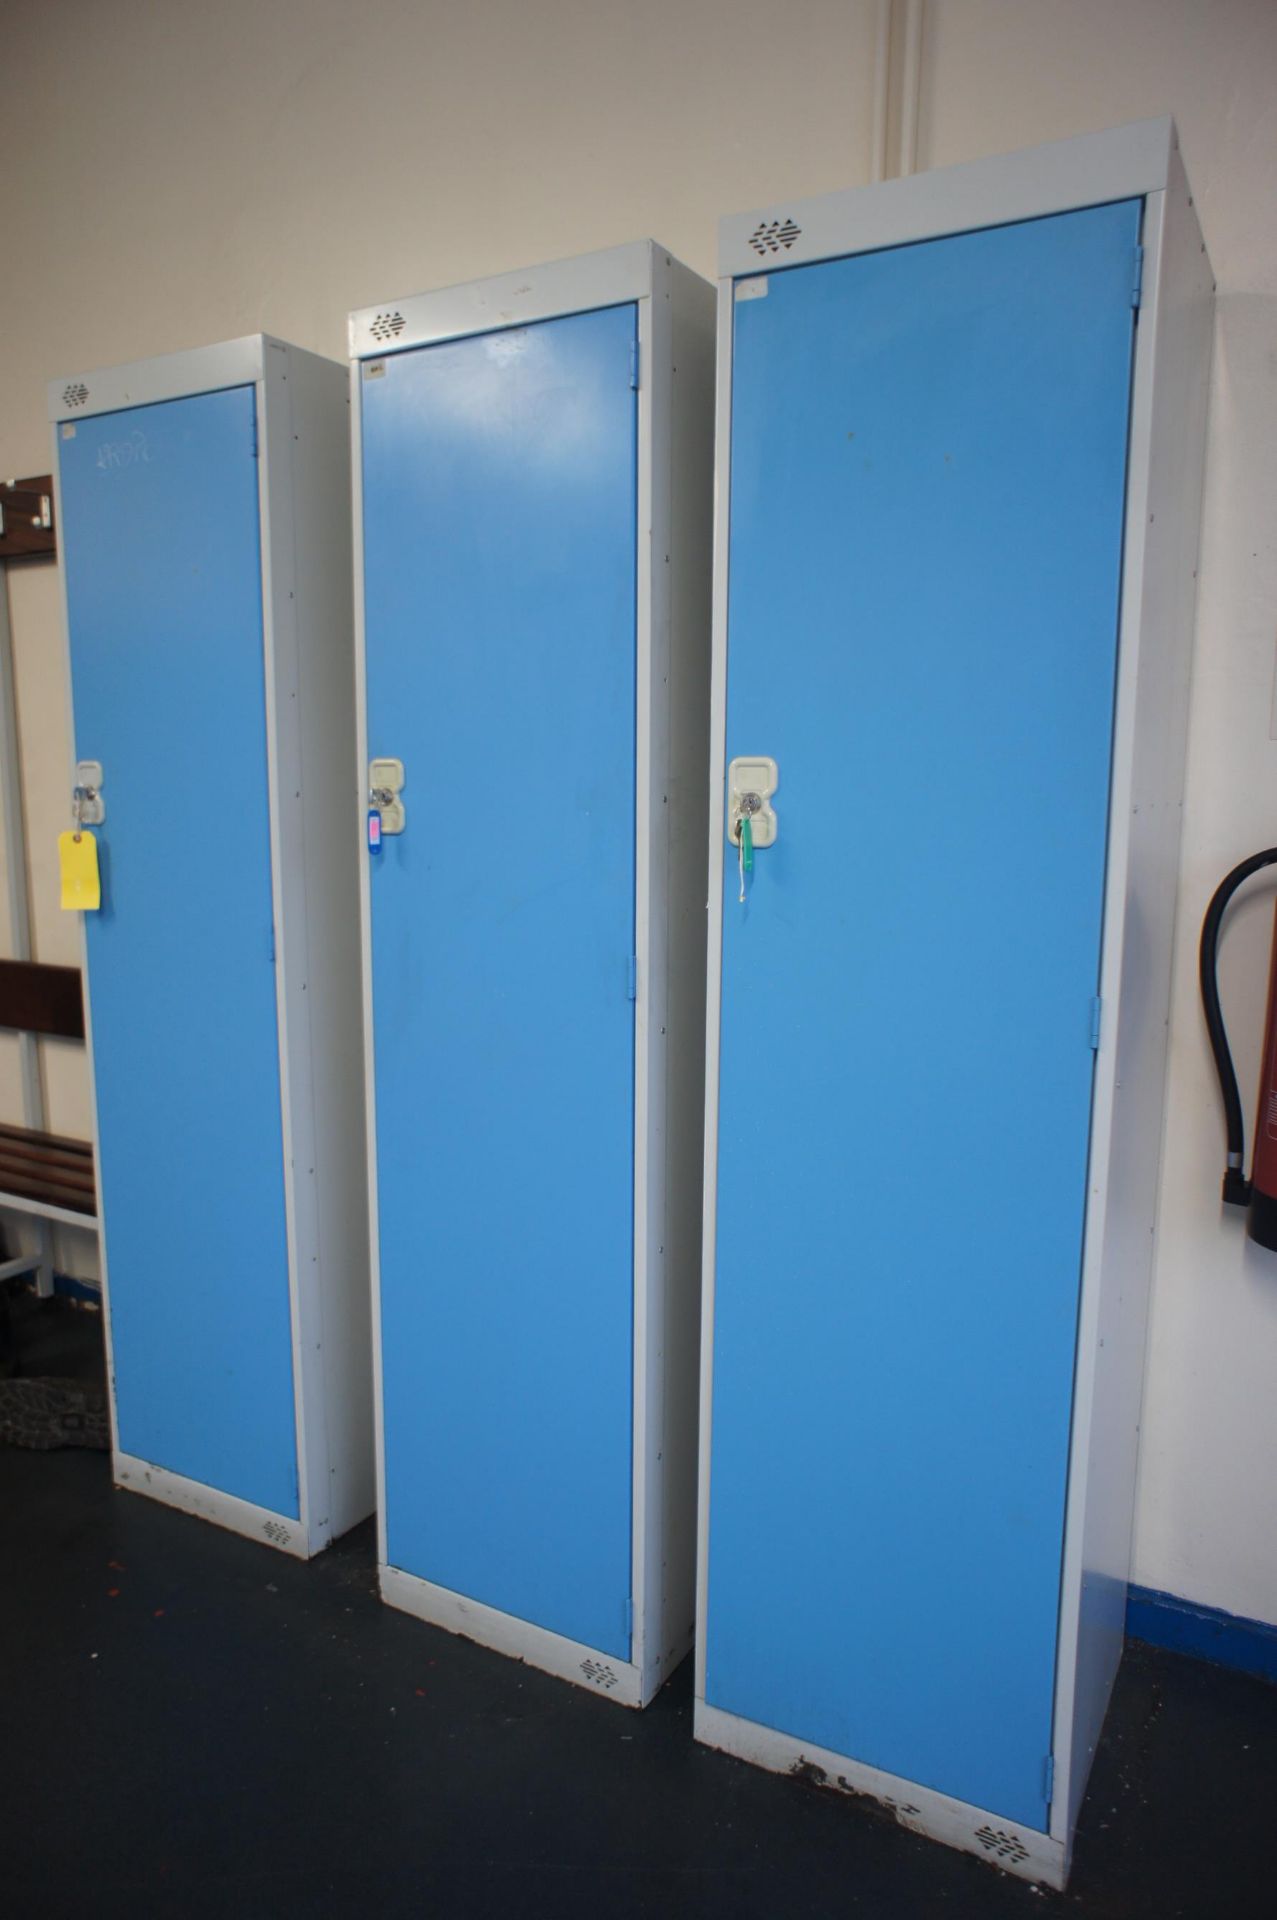 10 x Arco 2 Tone Personel Lockers with Key. 1800 x 450 x450mm - Image 2 of 2